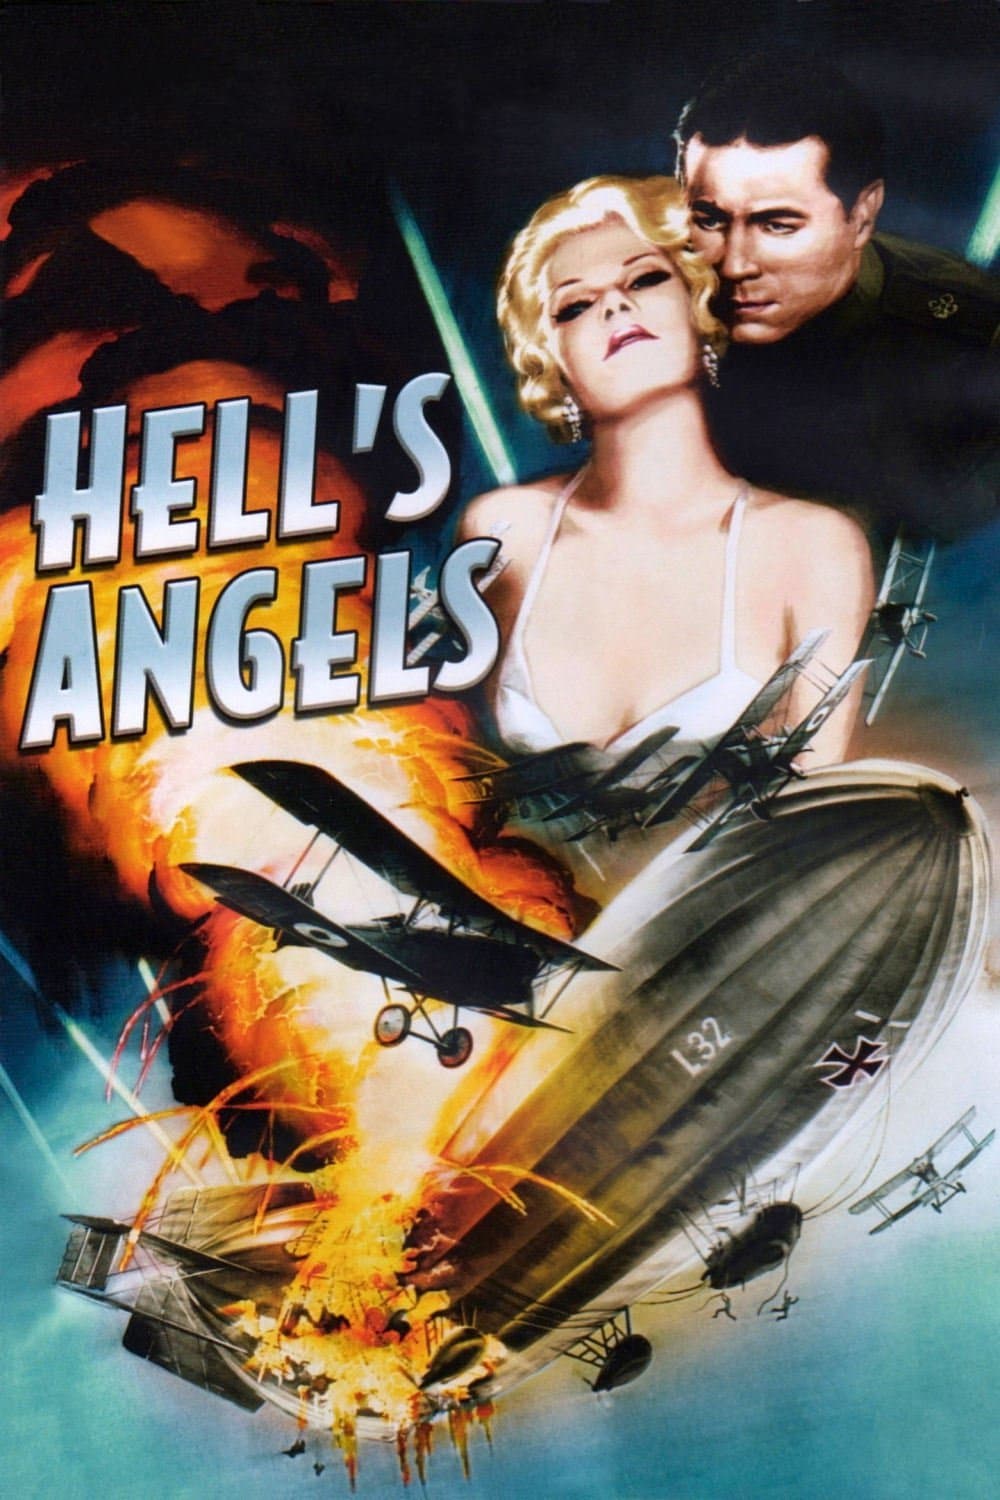 Hell's Angels (1930)